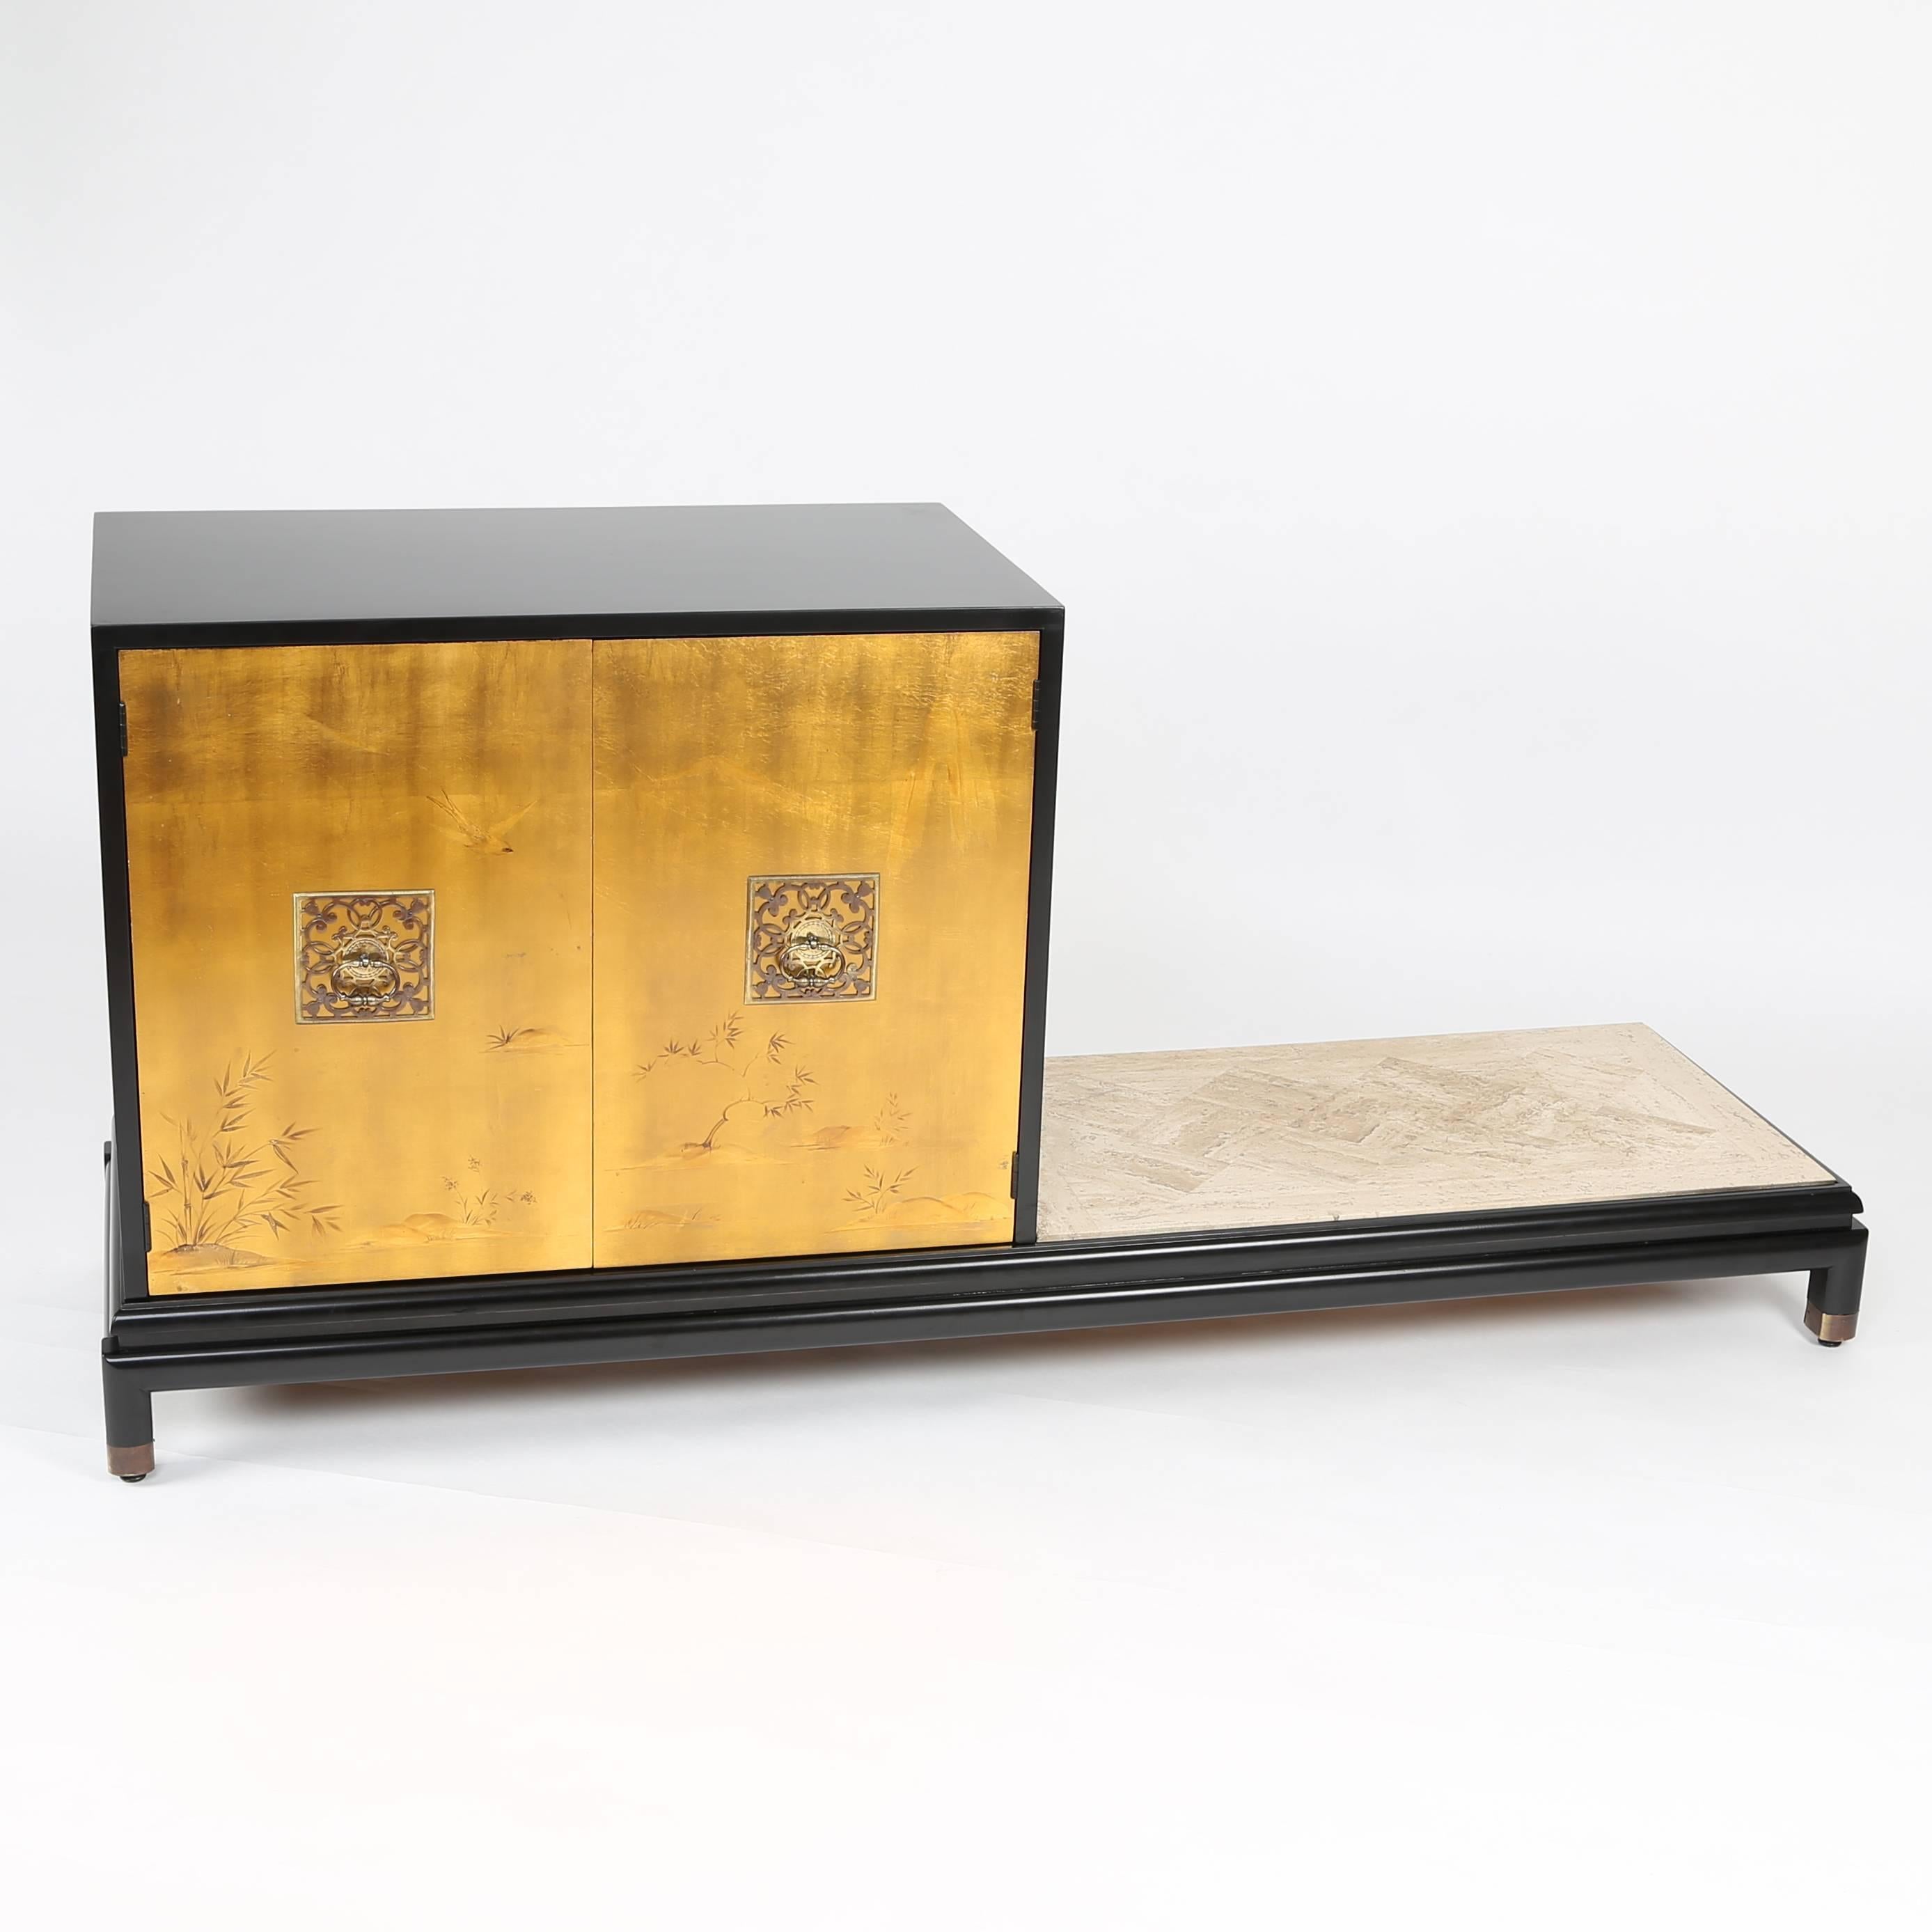 An asymmetrical cabinet with bench in Rutili's signature style, featuring a mix of modern and Asian elements. A single, black-lacquered platform on four feet supports a travertine bench or platform on the right side; on the left is a two-door